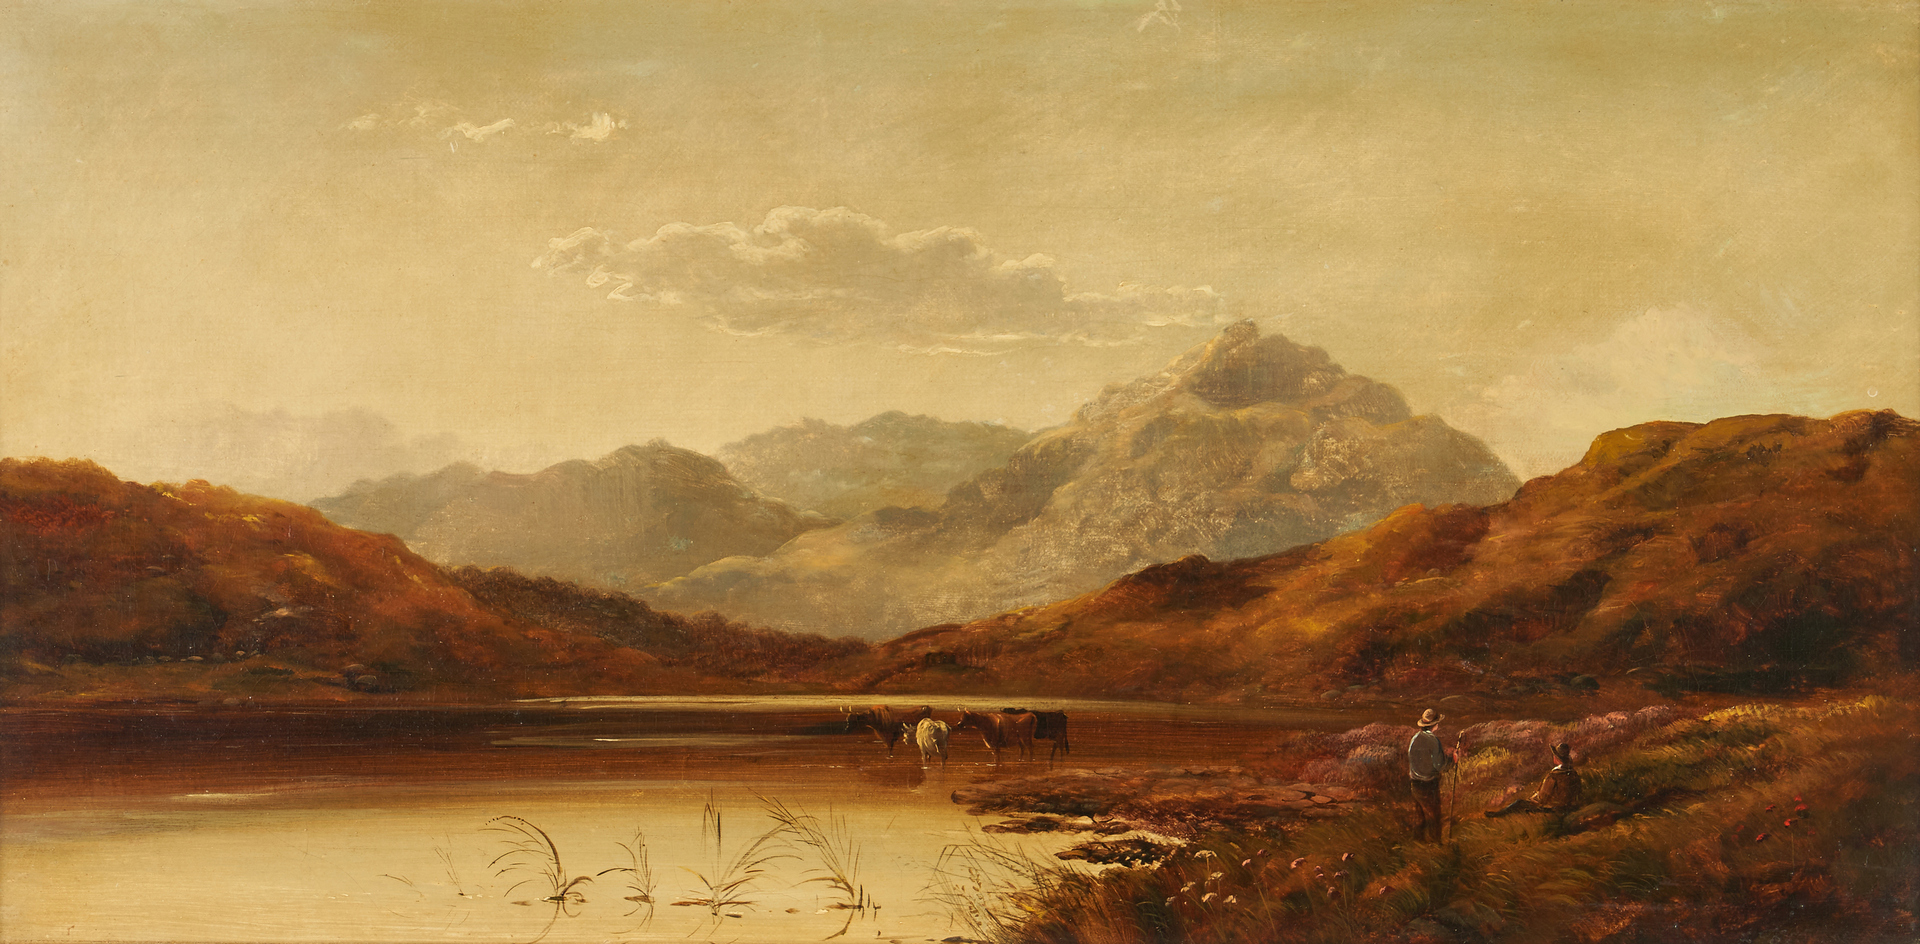 Lot 319: Attr. Charles Leslie, O/C Landscape with figures and cattle